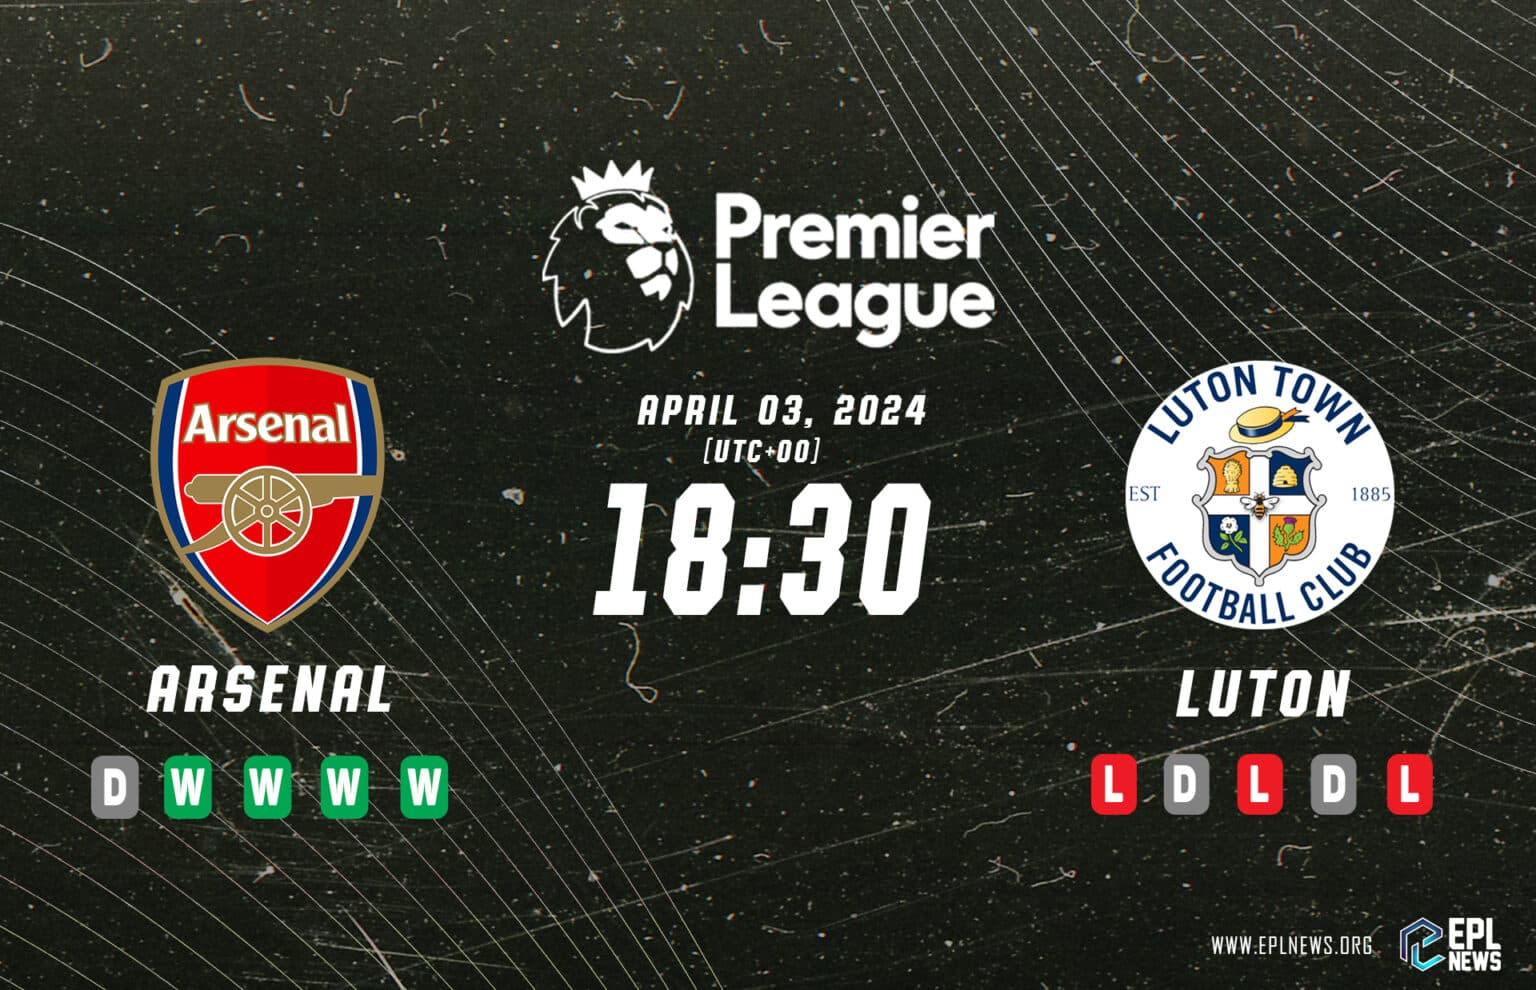 Arsenal vs Luton Town Preview- Make-or-Break at Both Ends of the Table